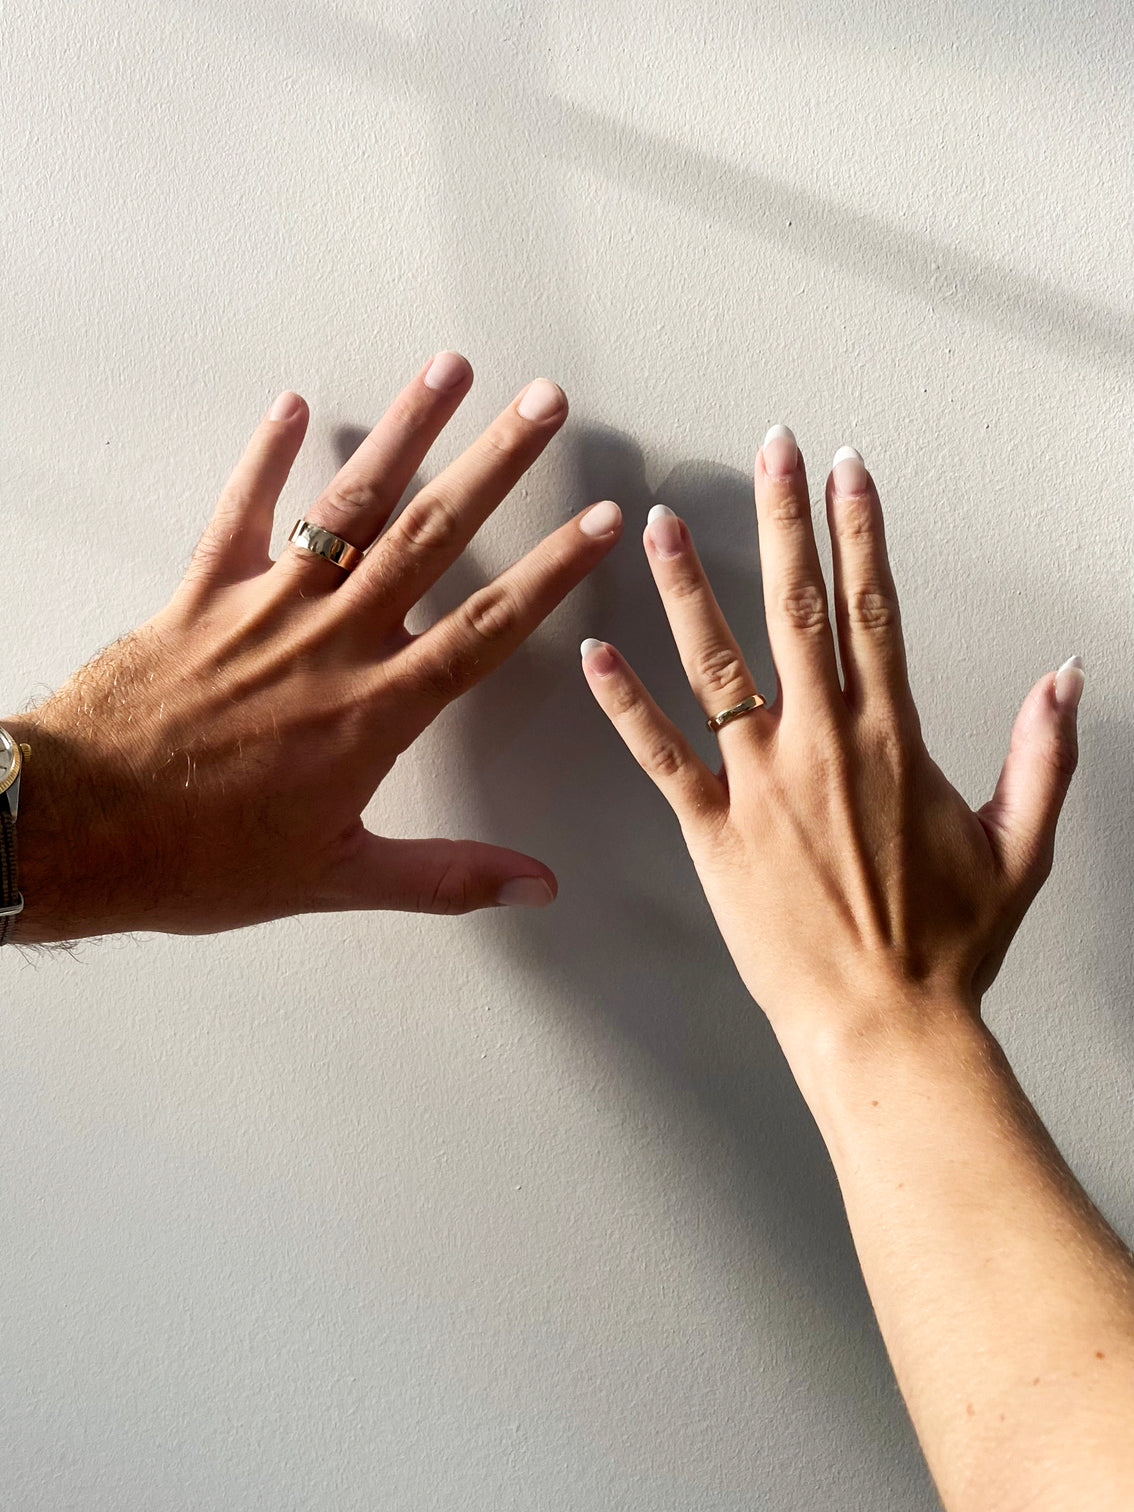 Two hands each with a wedding ring on in front of white wall